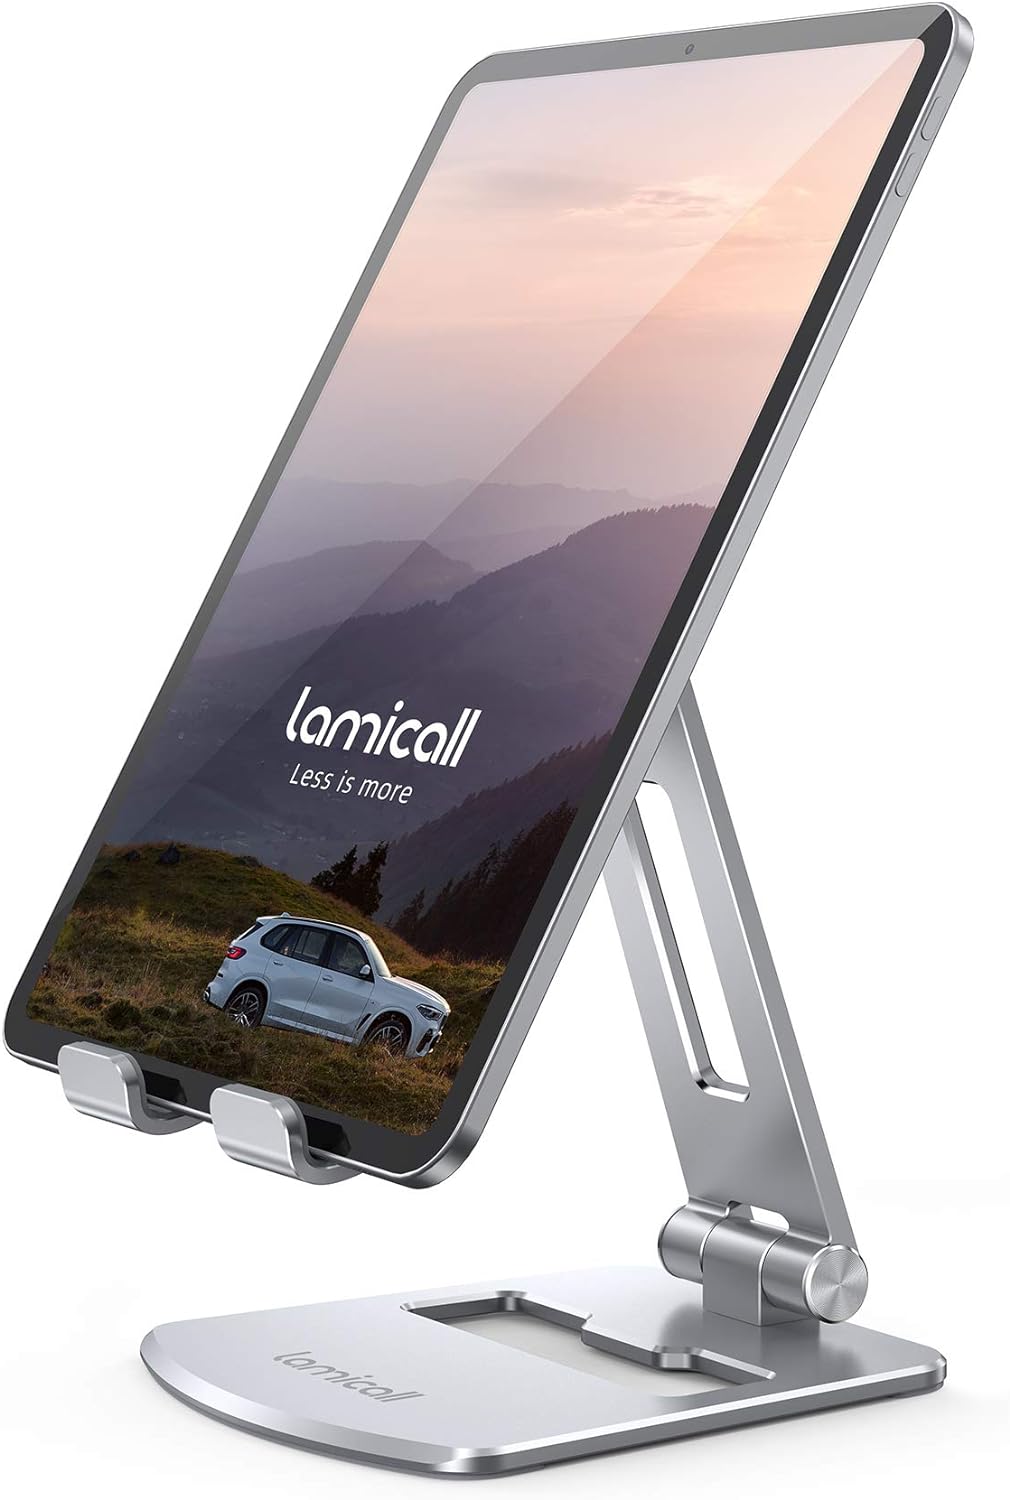 Lamicall Tablet Stand, Foldable Holder - Adjustable Tablet Dock, for 4.7 - 13 Tablet, Such as iPad Pro 11/10.5/12.9, Mini, Air, Galaxy Tabs, Kindle, Silver